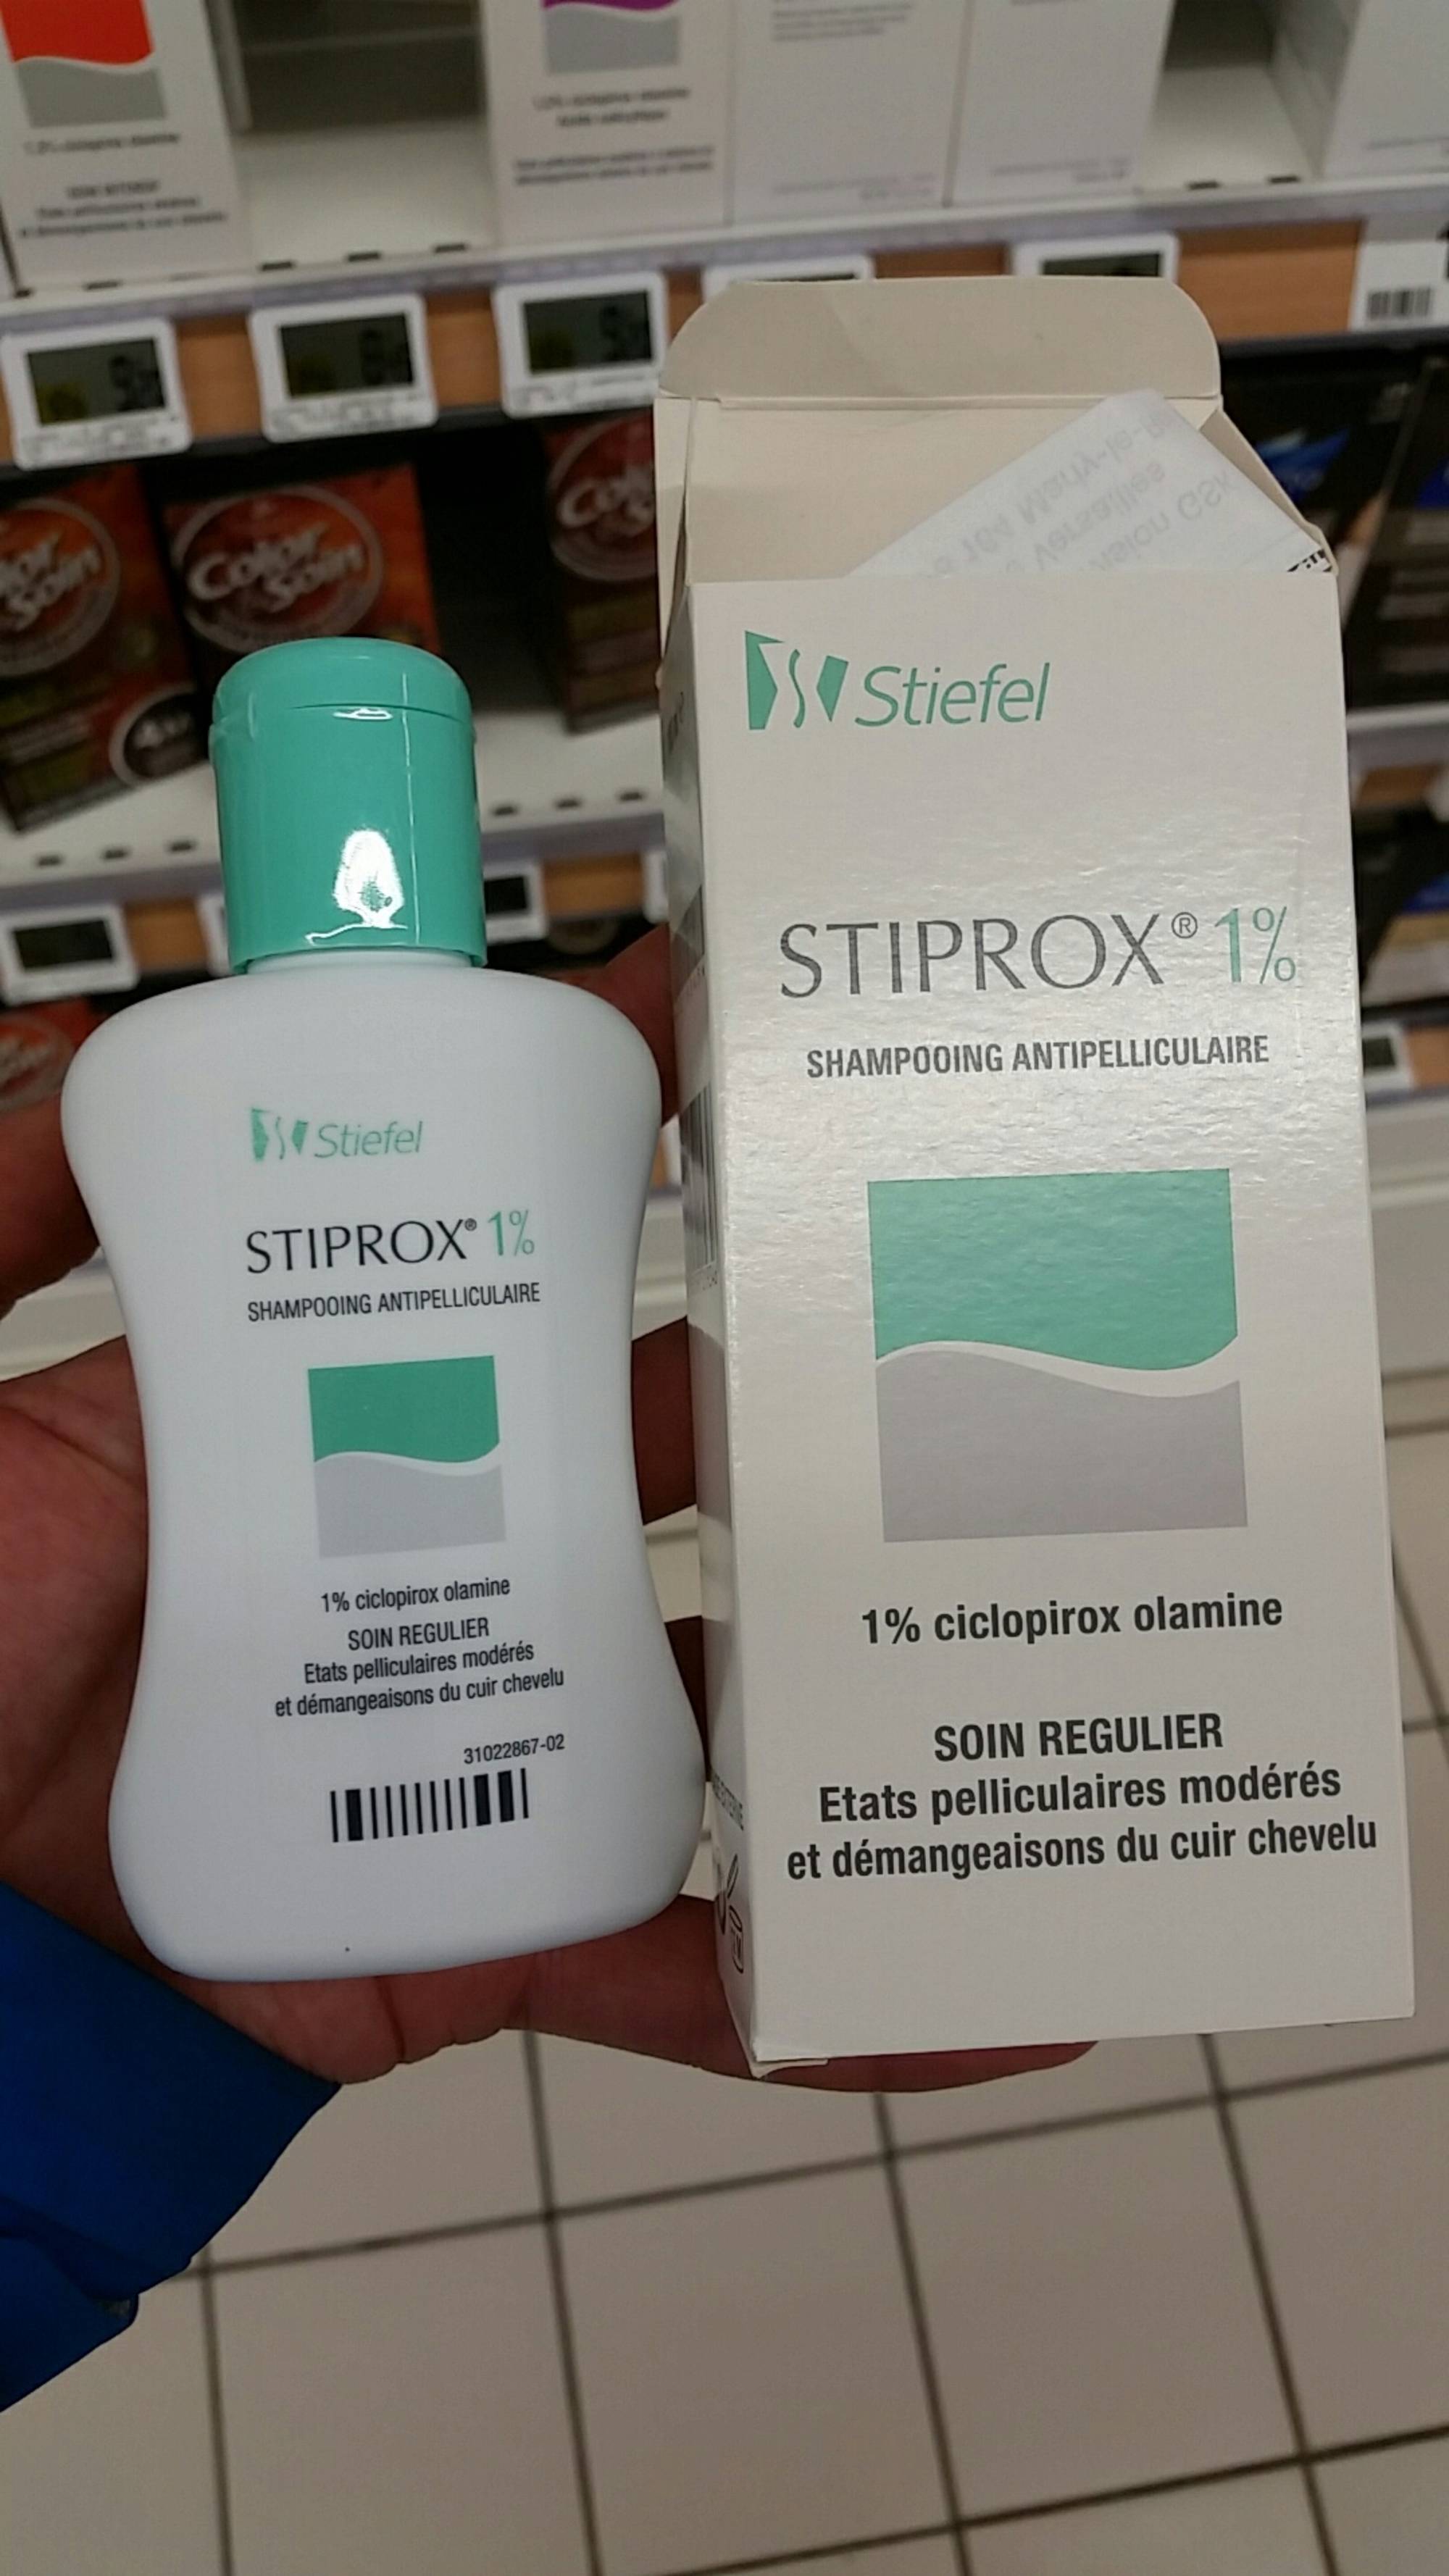 STIEFEL - Stiprox 1% - Shampooing antipelliculaire soin régulier